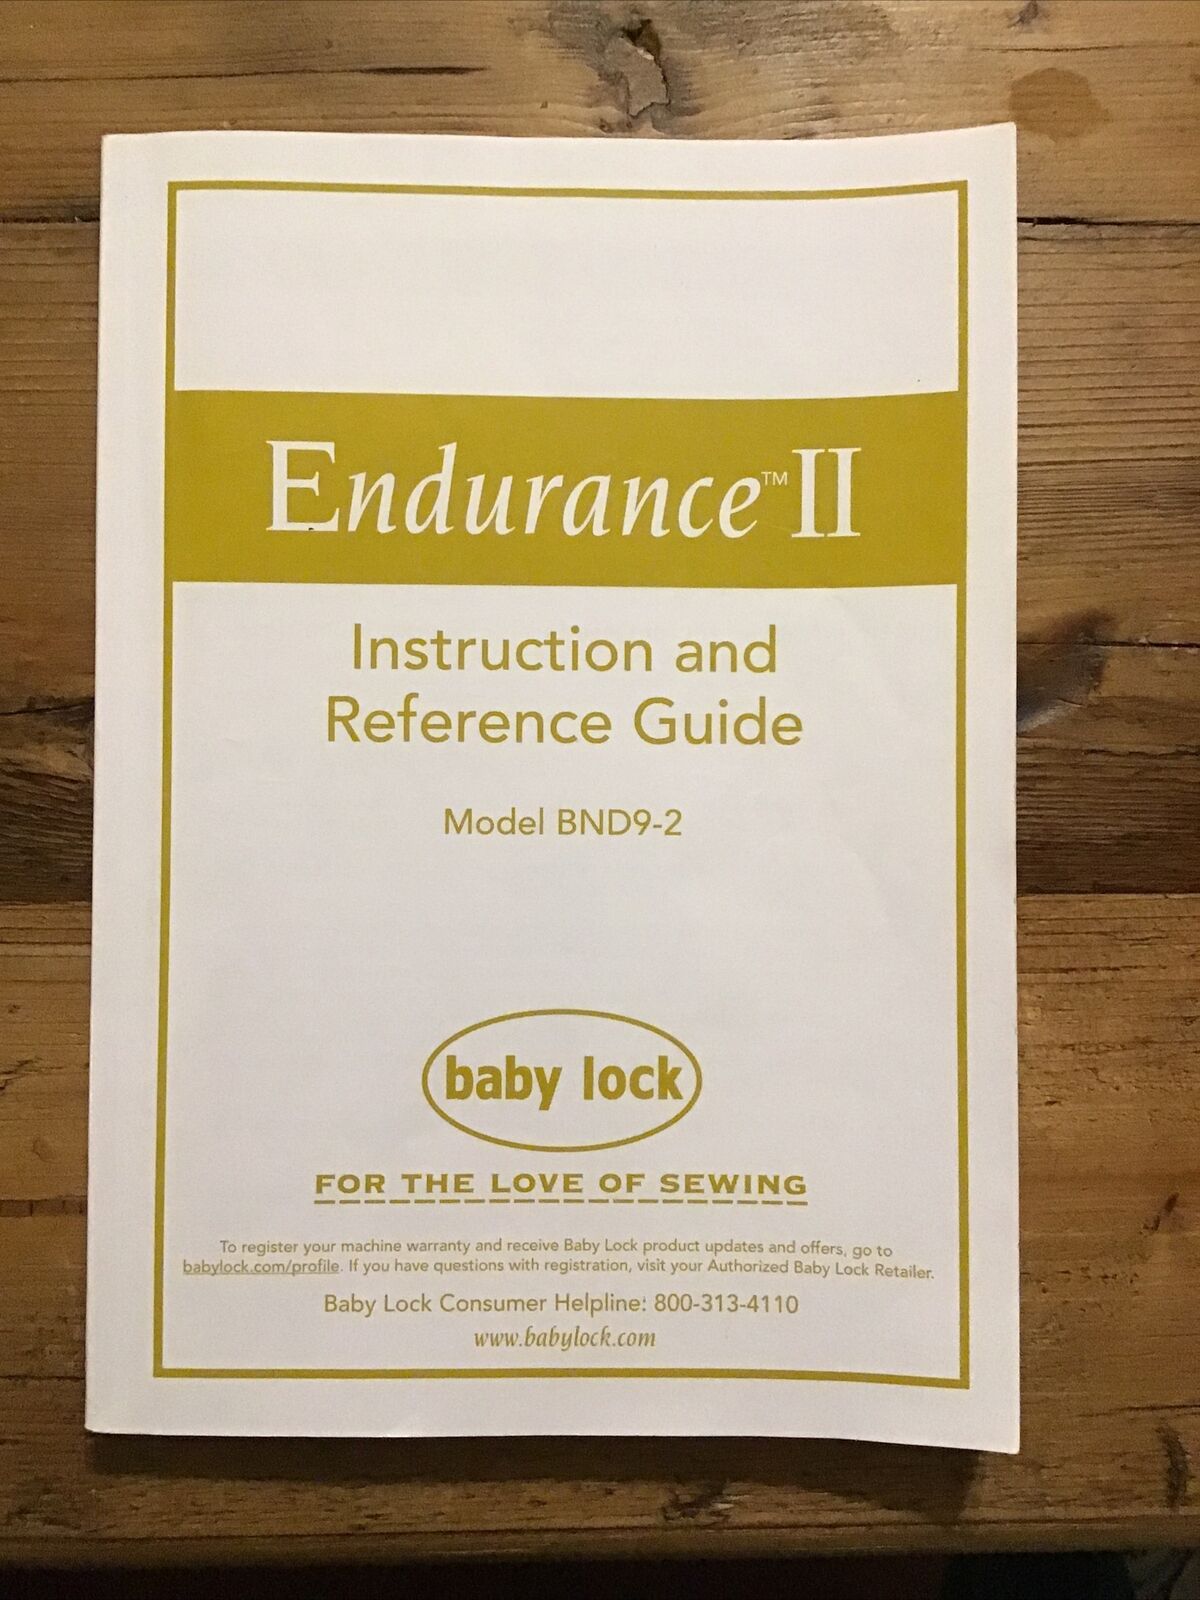 Baby Lock Endurance II BND9-2 Sewing Machine Instructions And Reference Guide